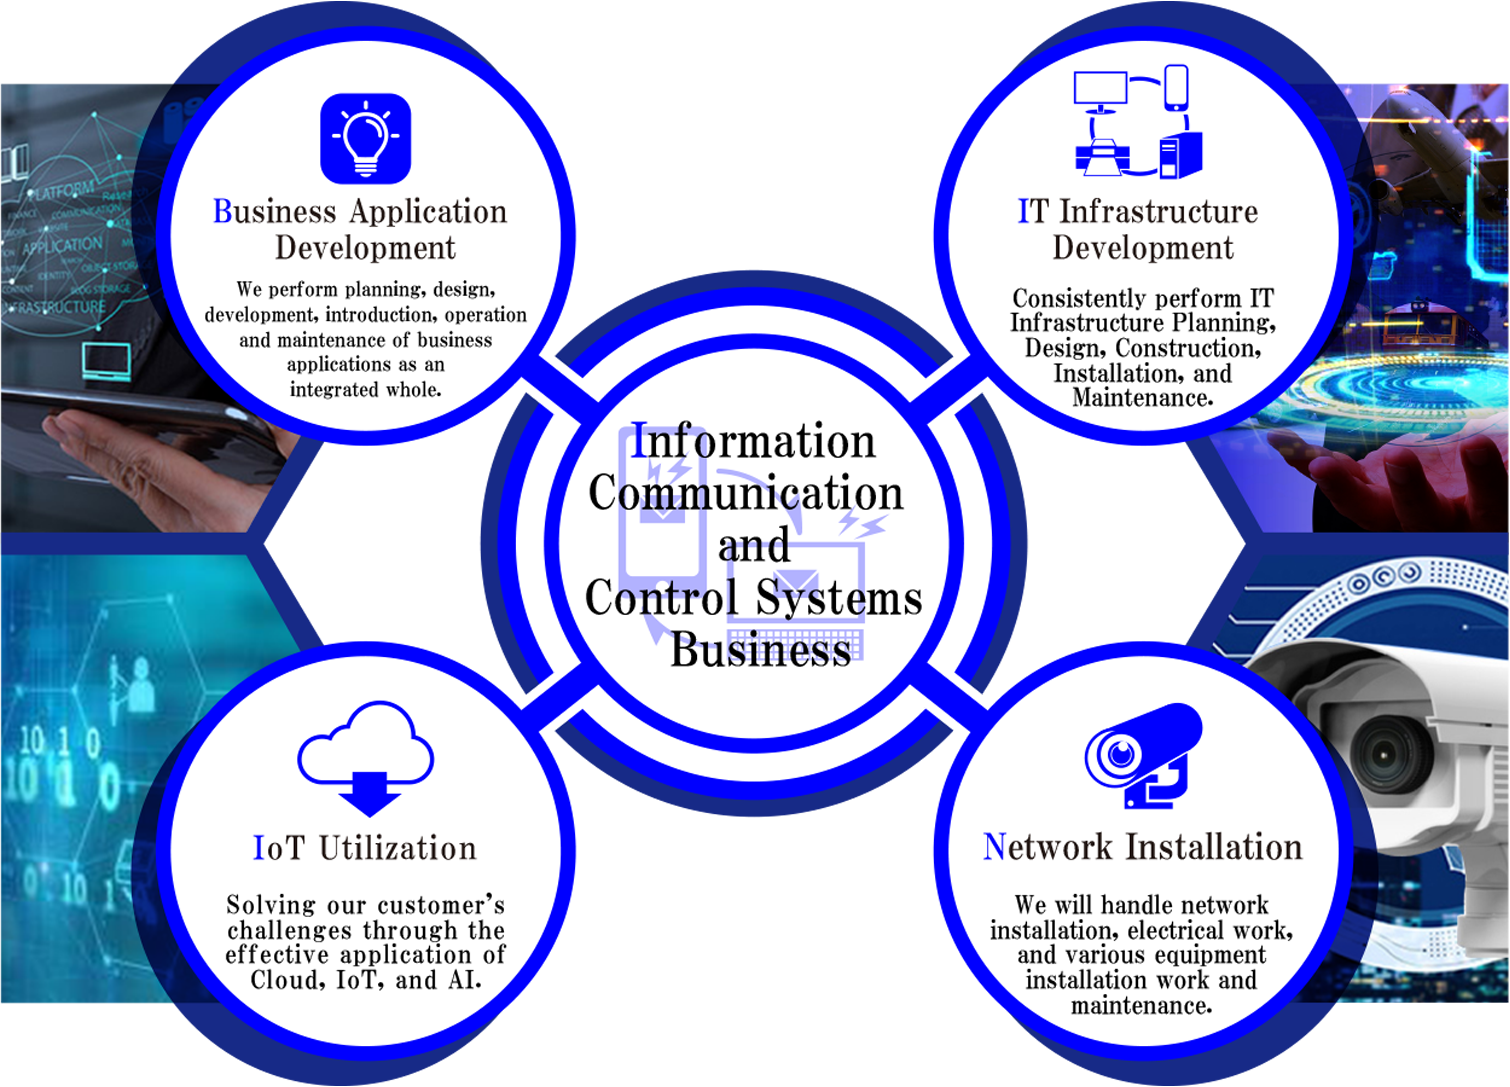 Information Communication and Control Systems Business